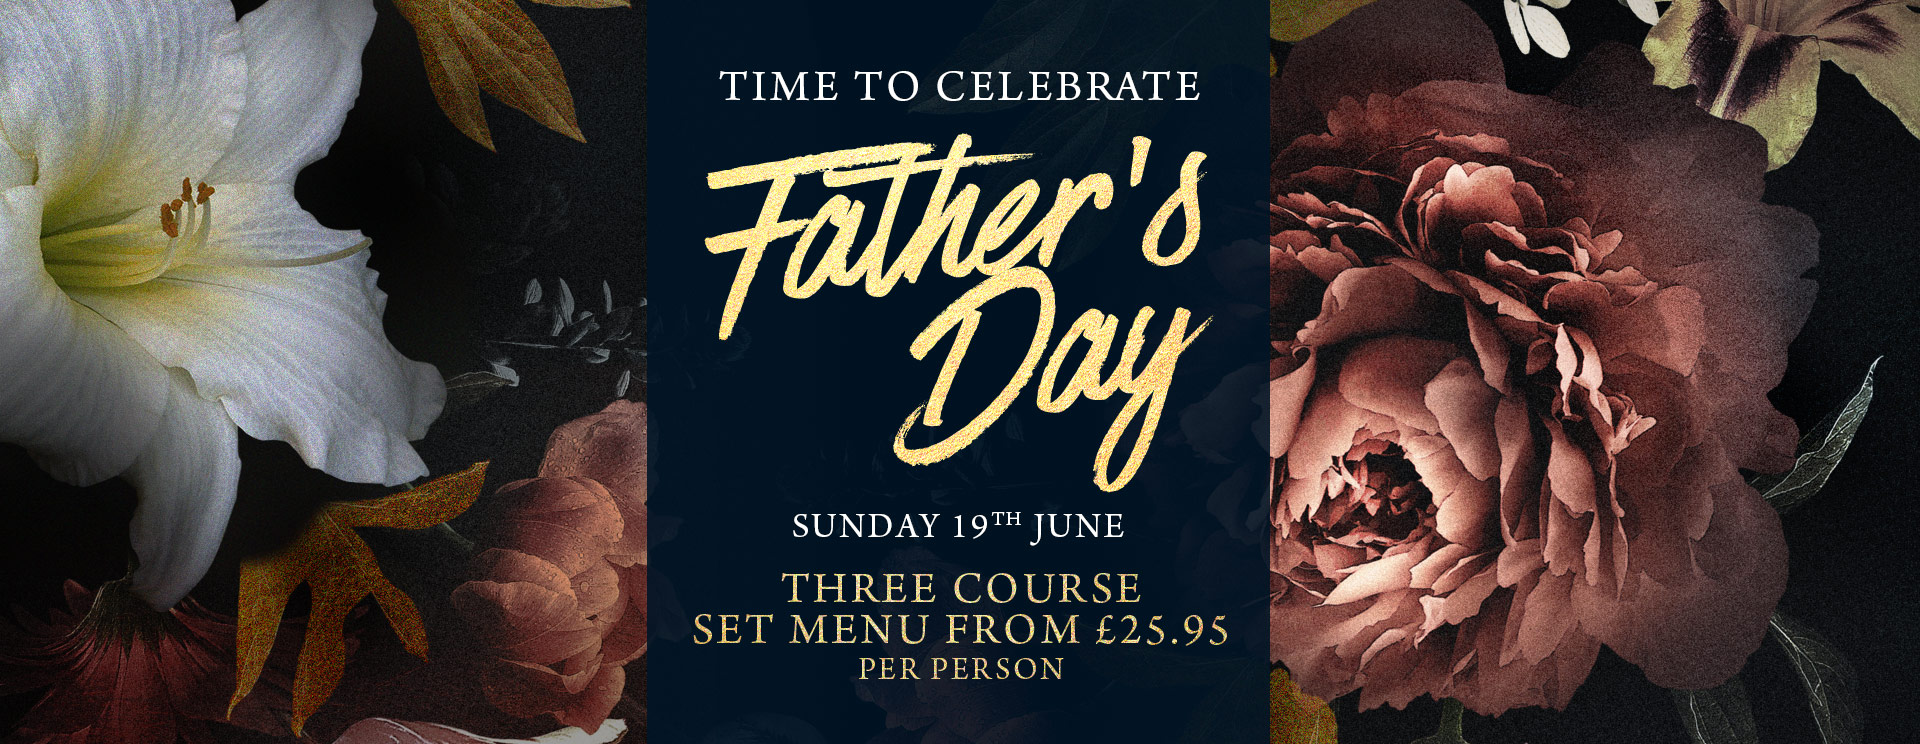 Fathers Day at The White Hart